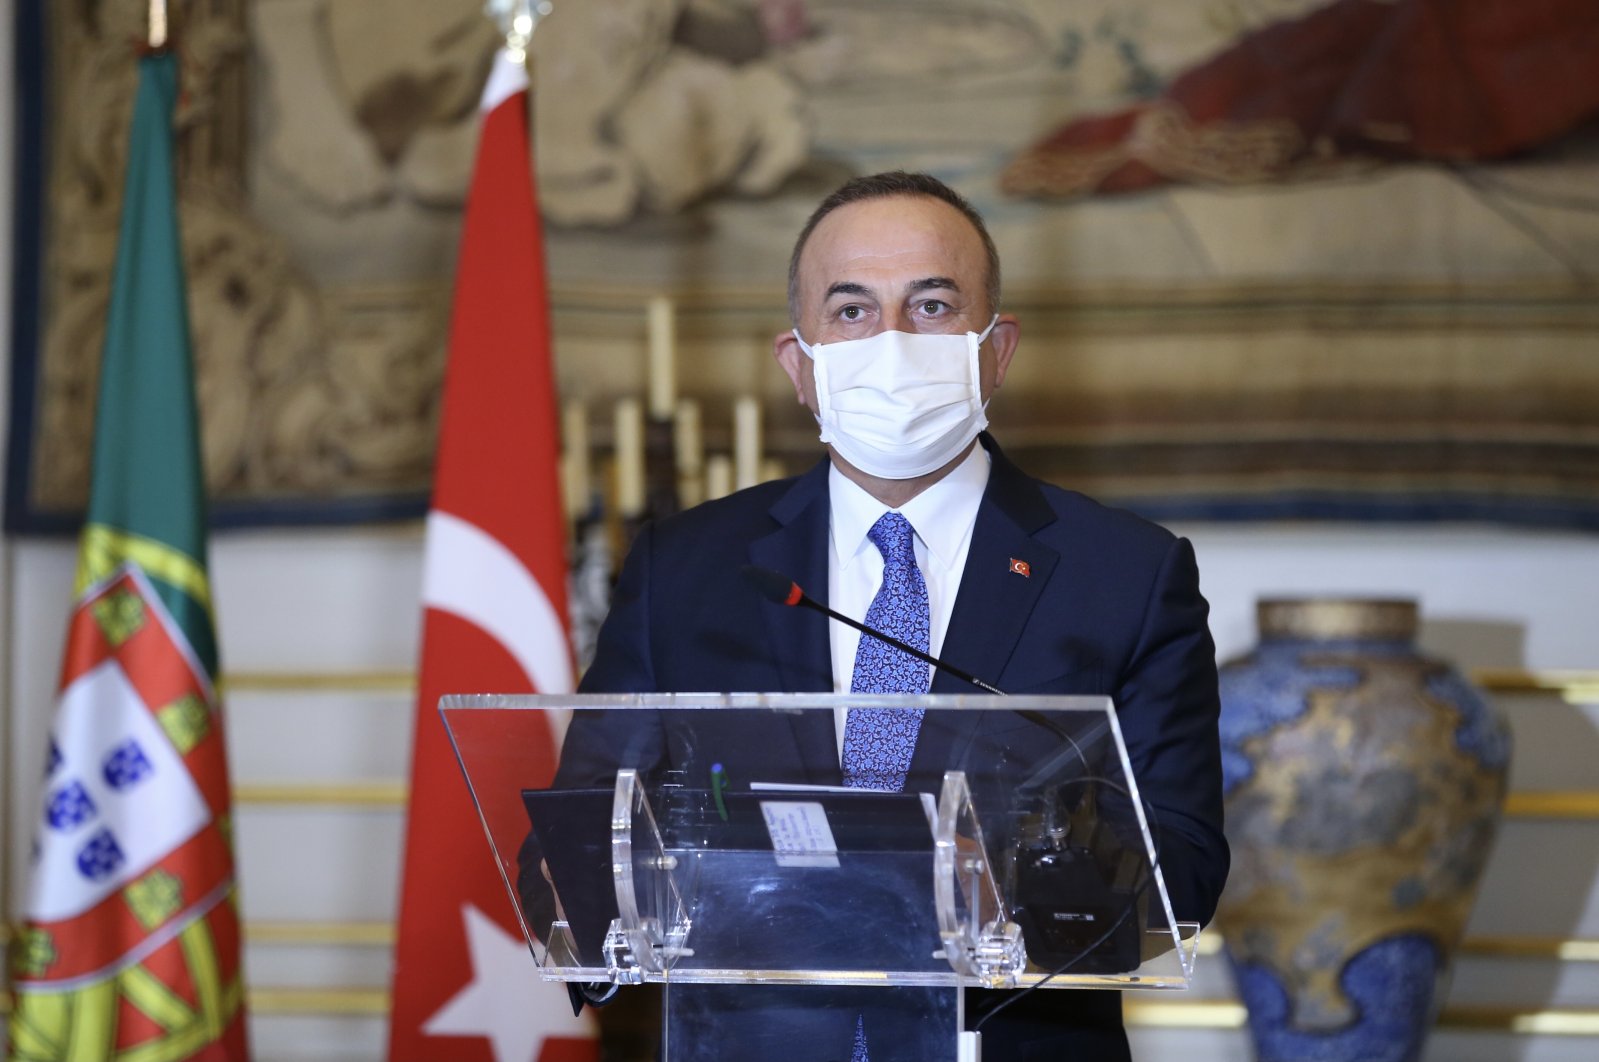 Foreign Minister Mevlüt Çavuşoğlu is seen during a joint news conference with his Portuguese counterpart Augusto Santos Silva in Lisbon, Portugal, Jan. 7, 2020. (AA Photo)